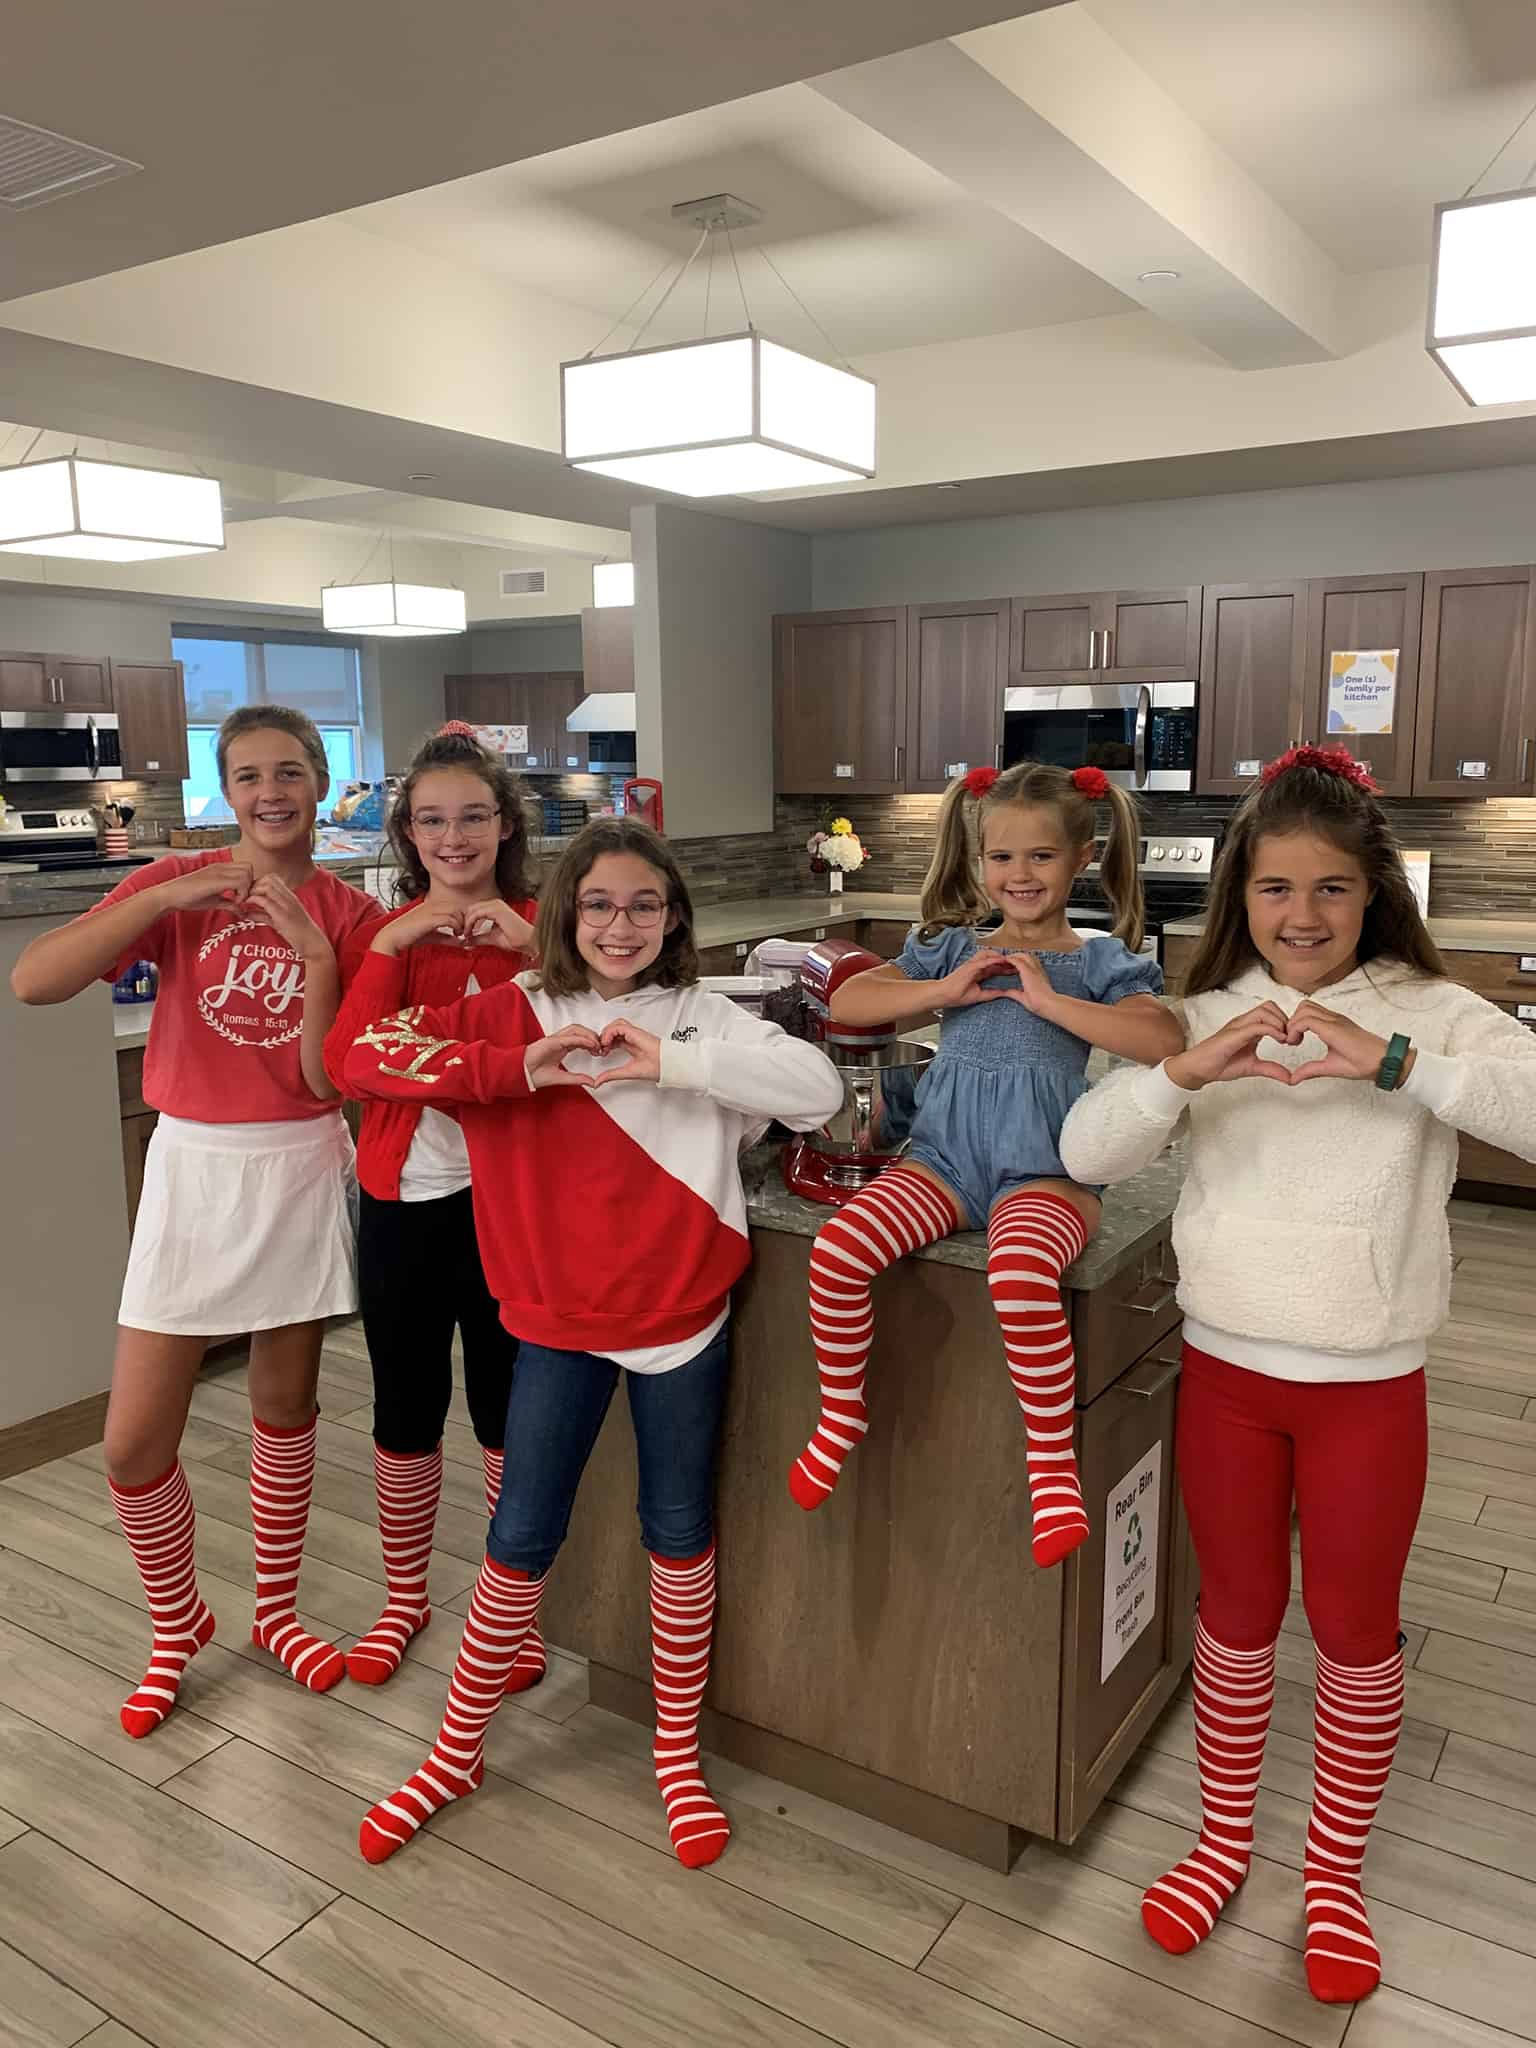 Youth volunteers in the kitchen wearing striped socks #forRMHC